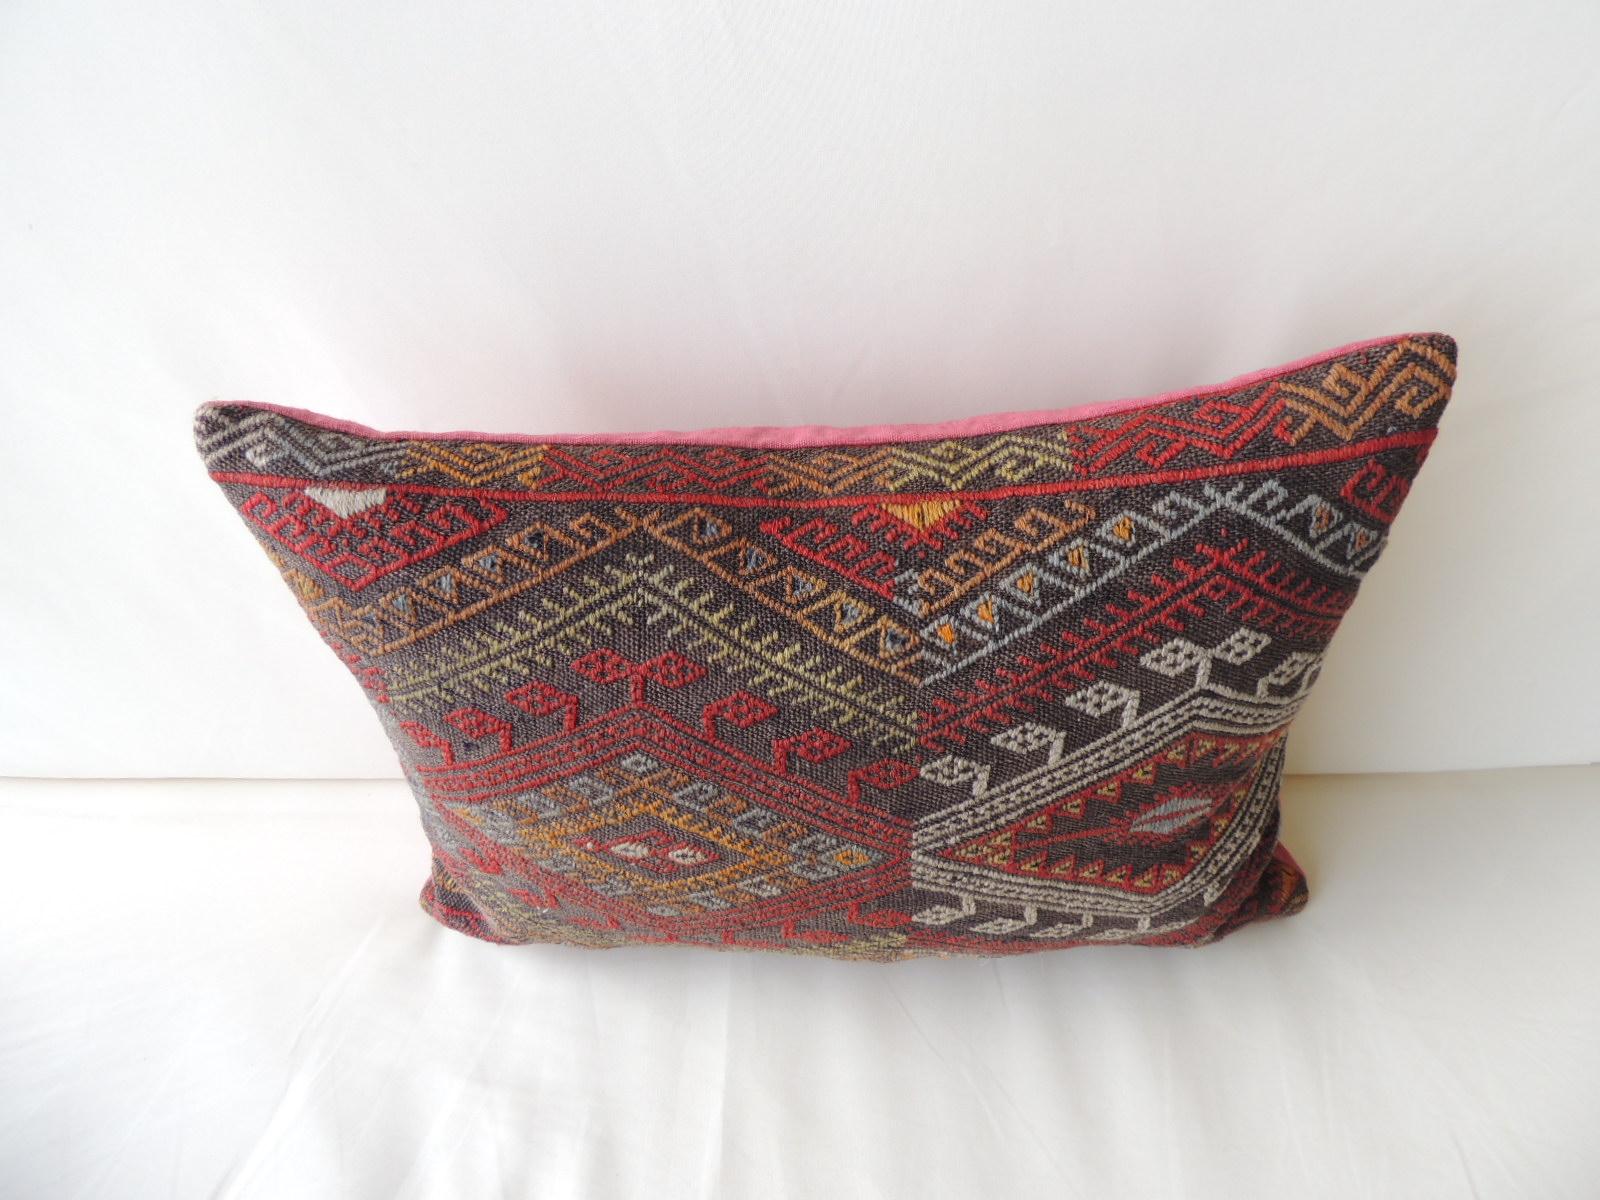 Moroccan Vintage Red and Orange Woven Kilim Bolster Decorative Pillow